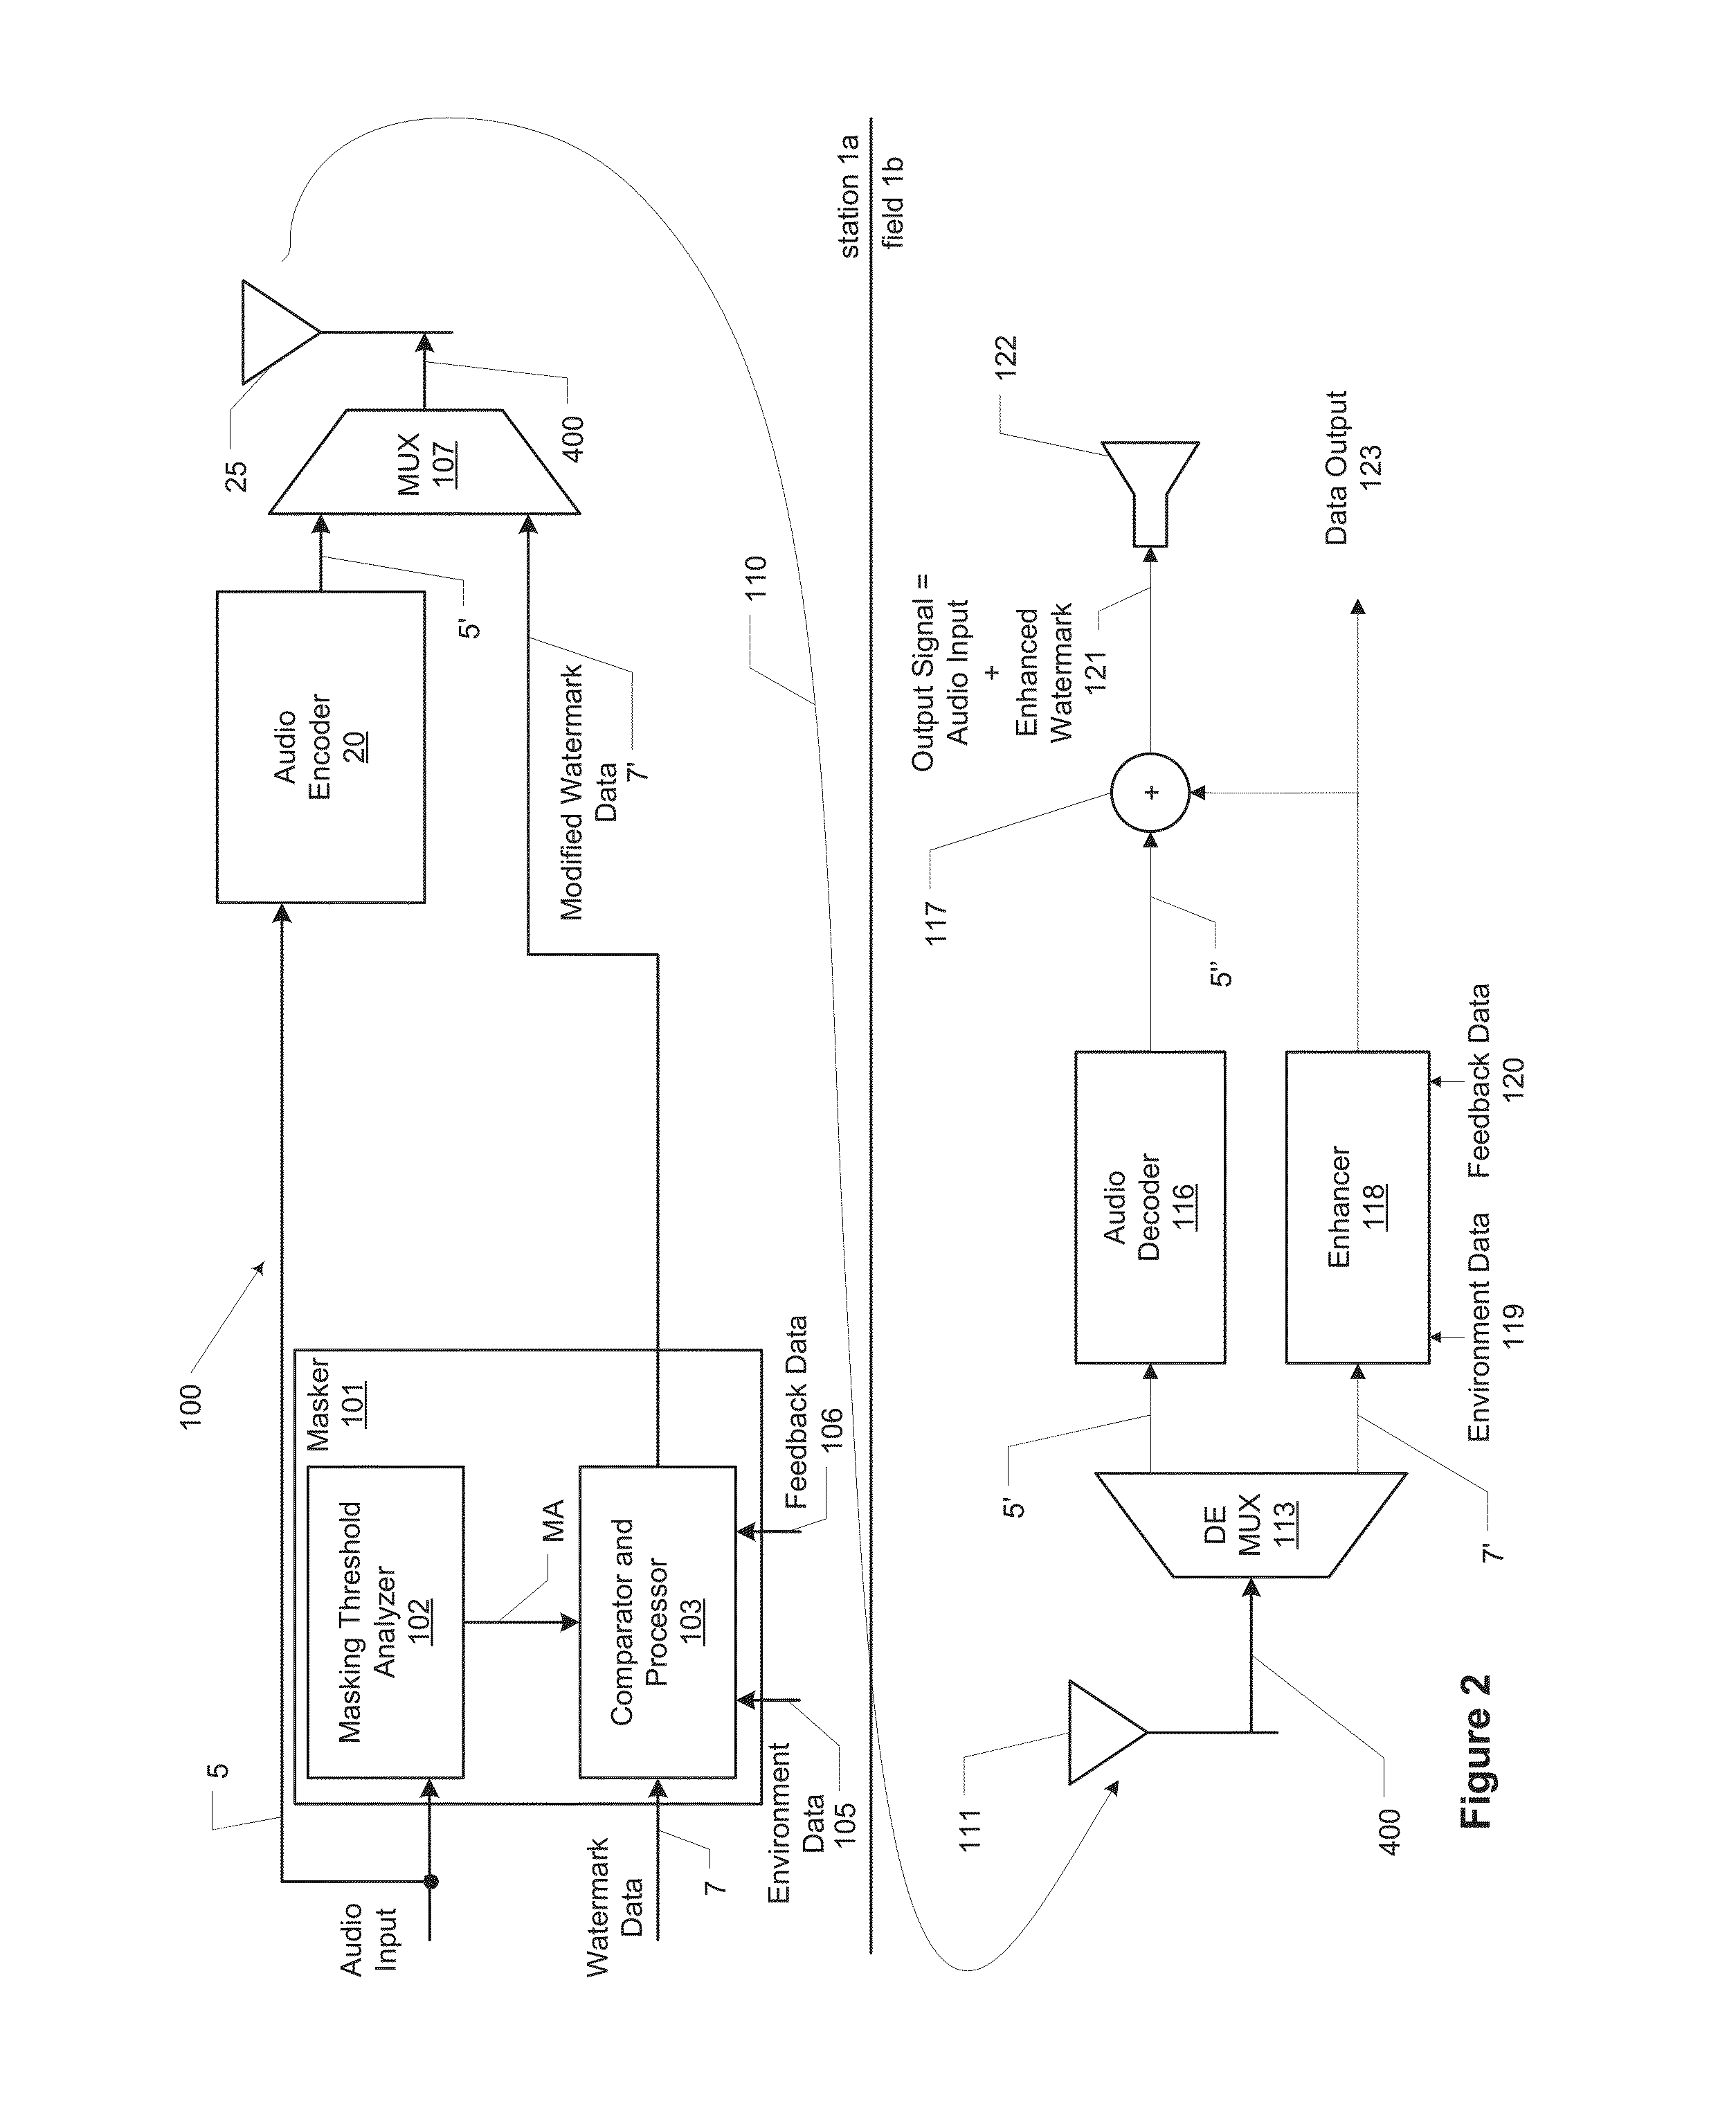 Data carriage in encoded and pre-encoded audio bitstreams